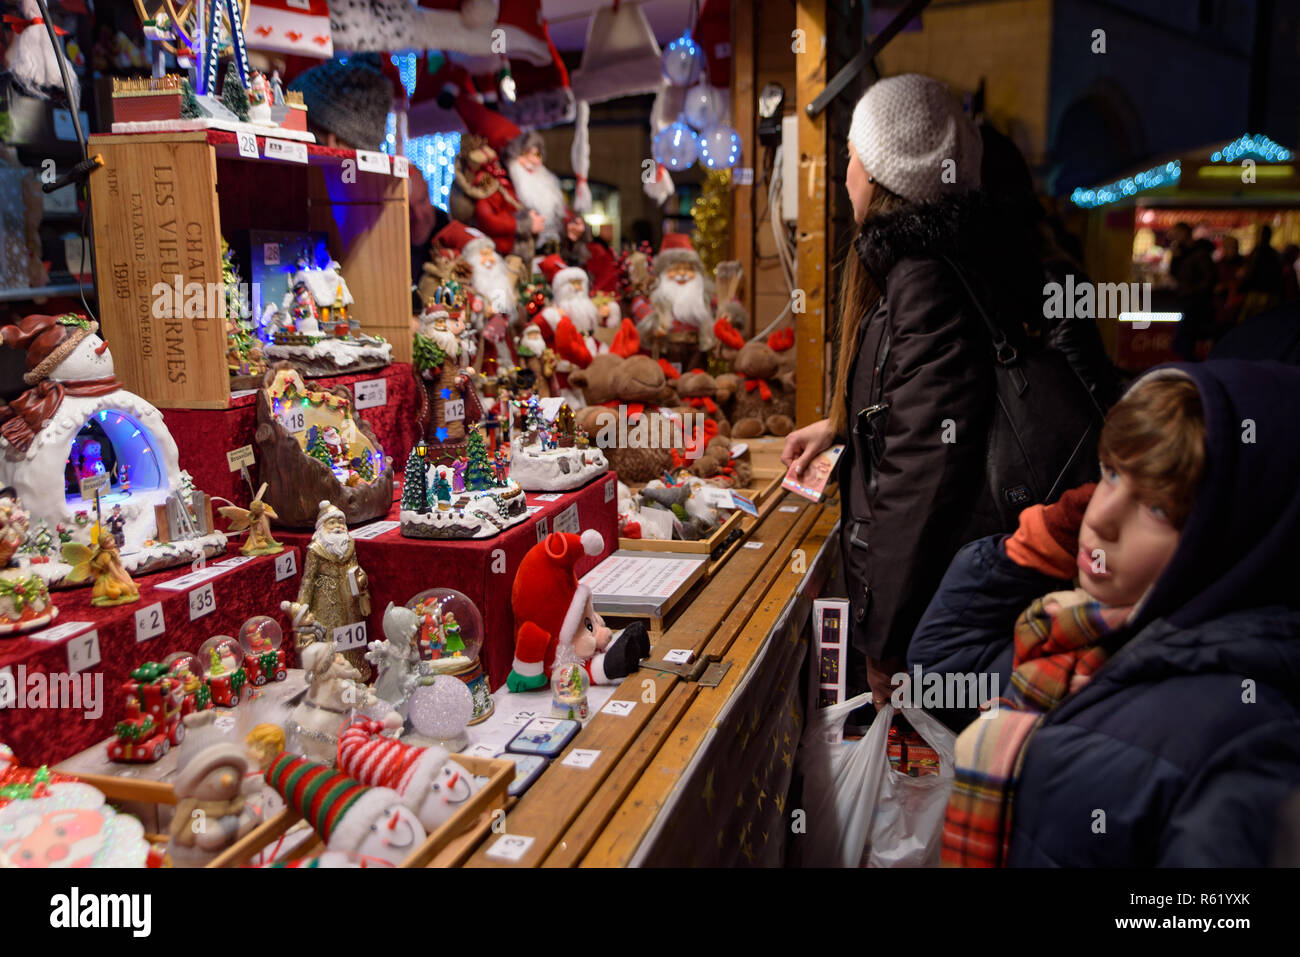 Art craft stall in 2018 Christmas market in Brussels, Belgium Stock Photo